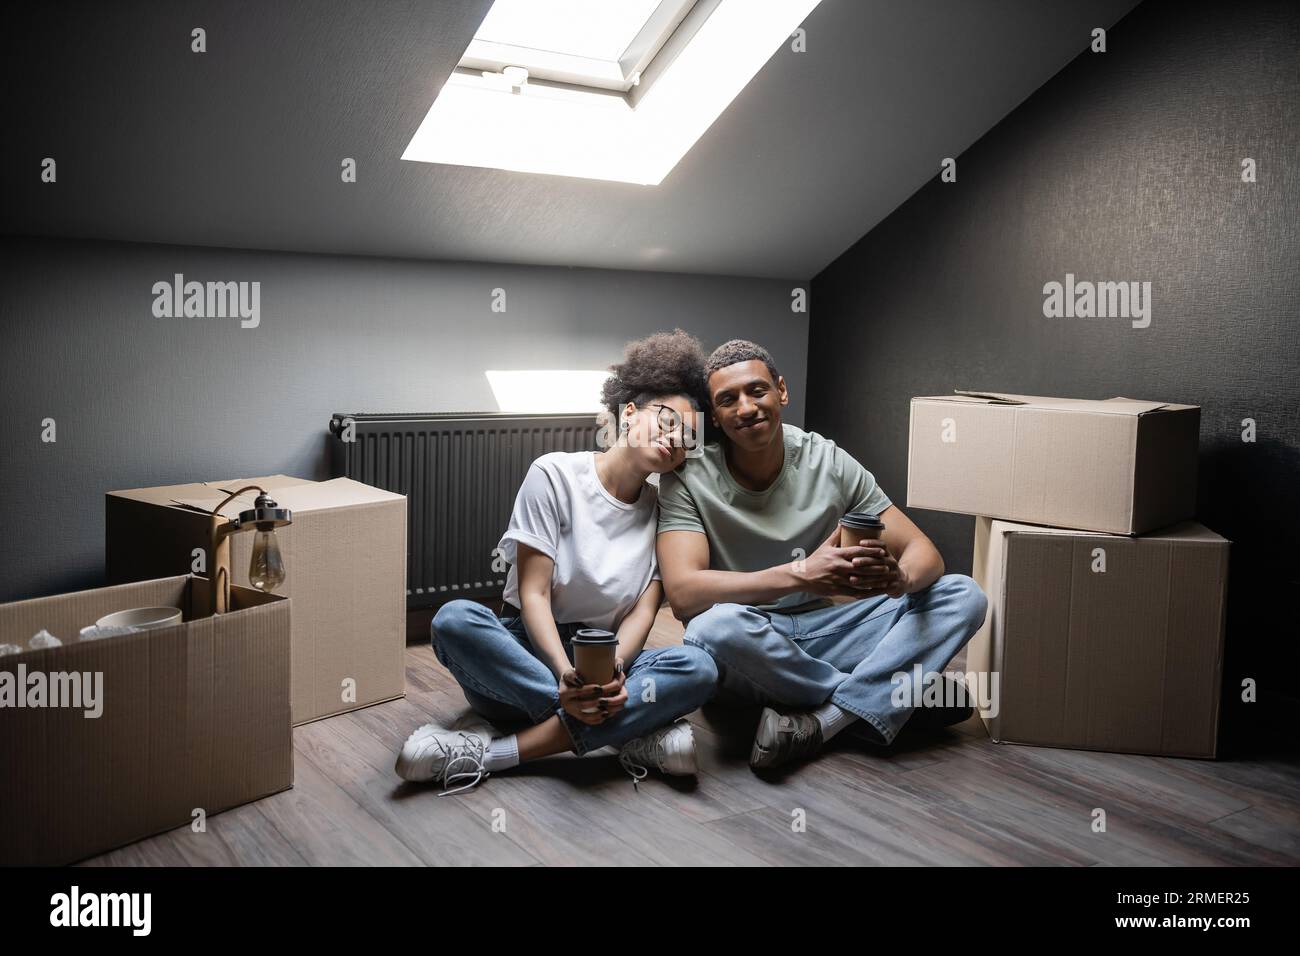 https://c8.alamy.com/comp/2RMER25/smiling-african-american-couple-holding-coffee-to-go-while-sitting-near-boxes-on-attic-in-new-house-2RMER25.jpg